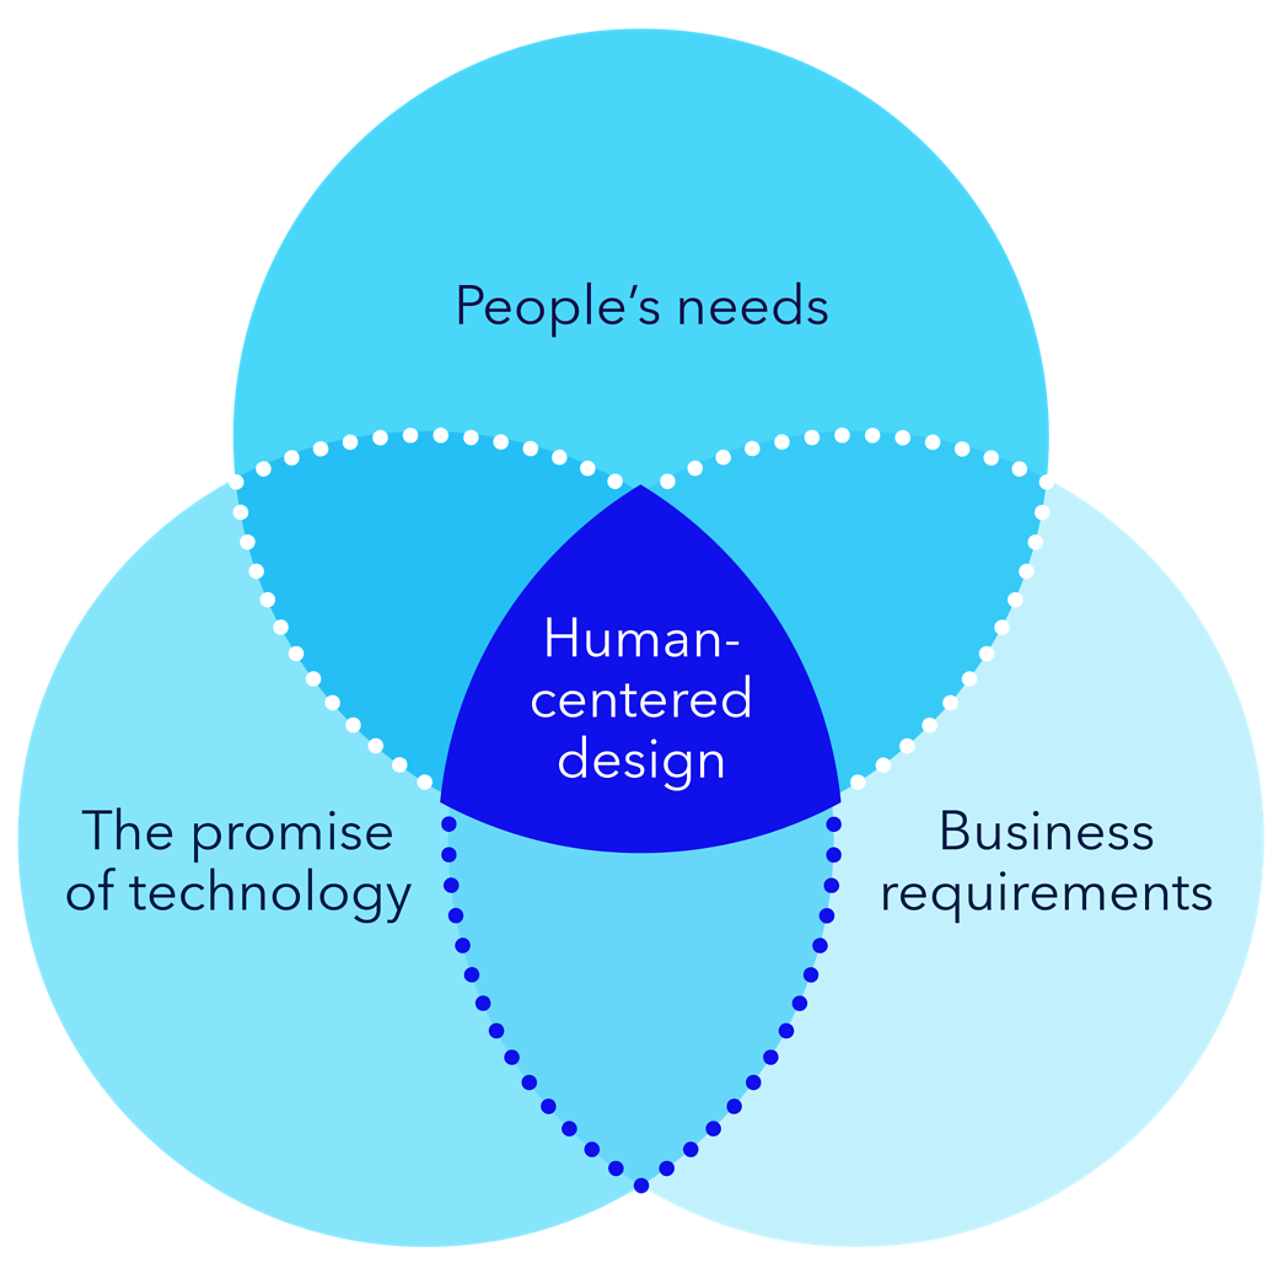 A graphic representation of human centered design elements and how they are linked